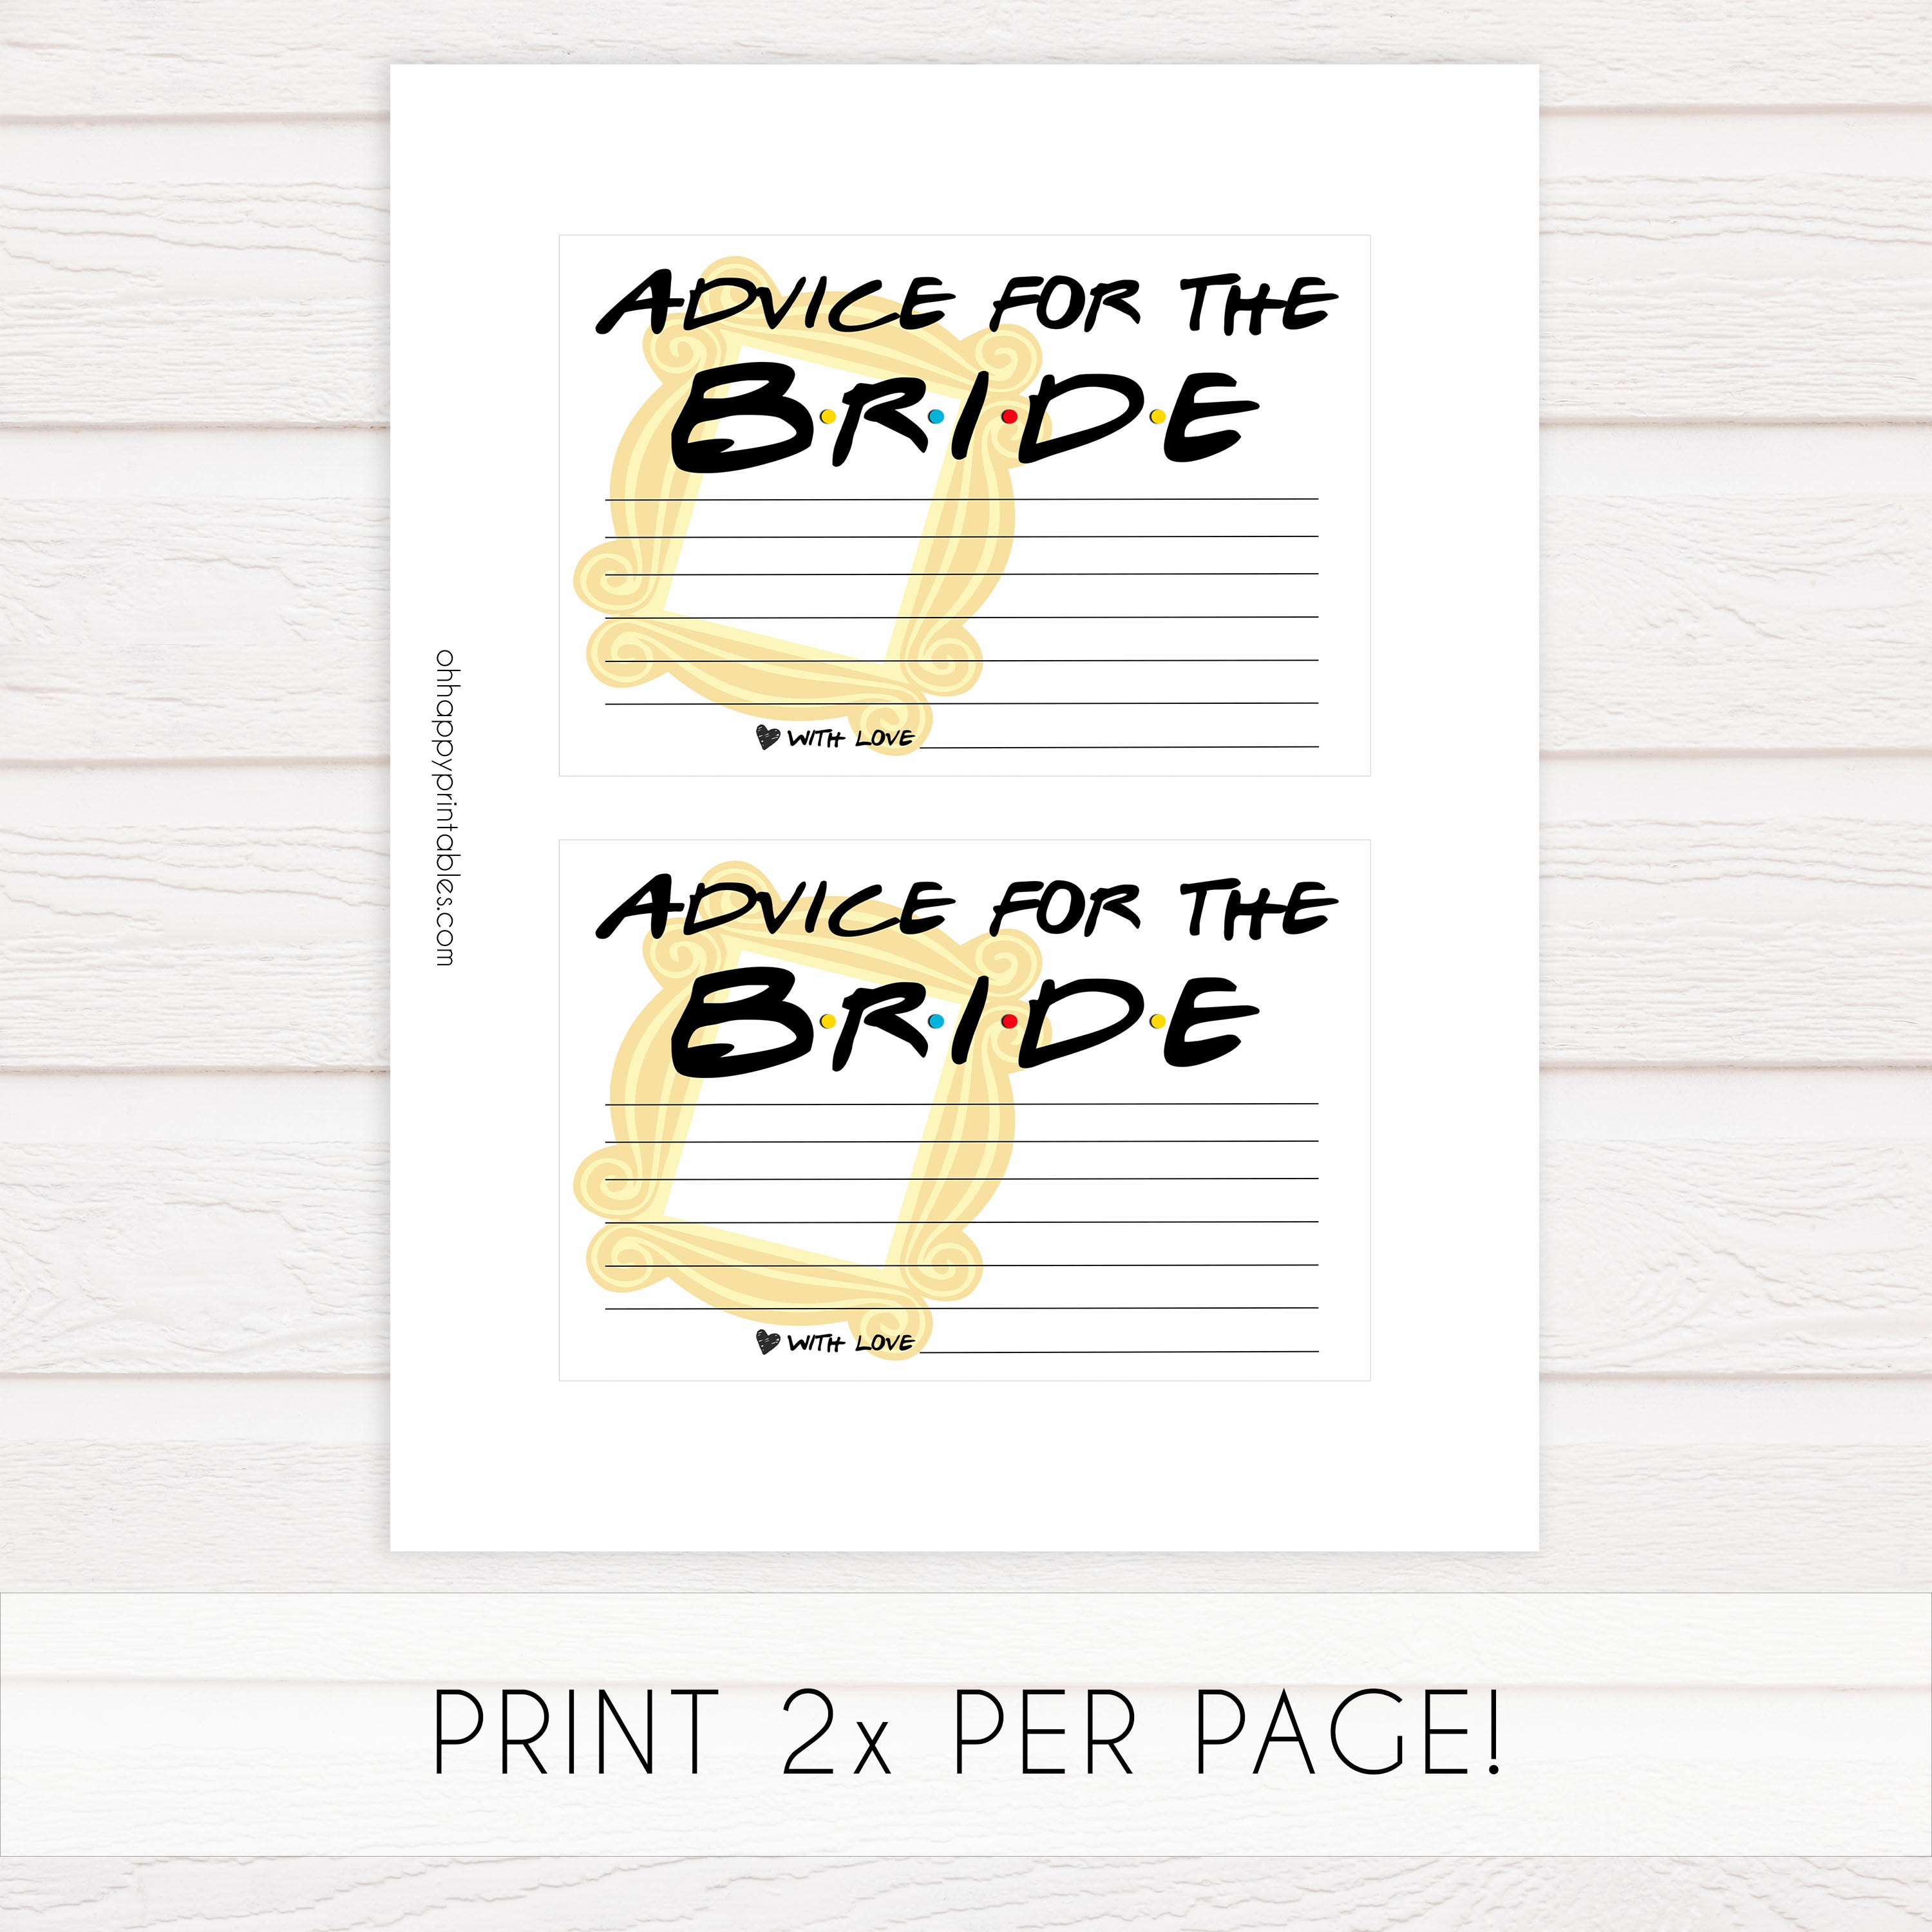 advice for the bridal, Printable bridal shower games, friends bridal shower, friends bridal shower games, fun bridal shower games, bridal shower game ideas, friends bridal shower